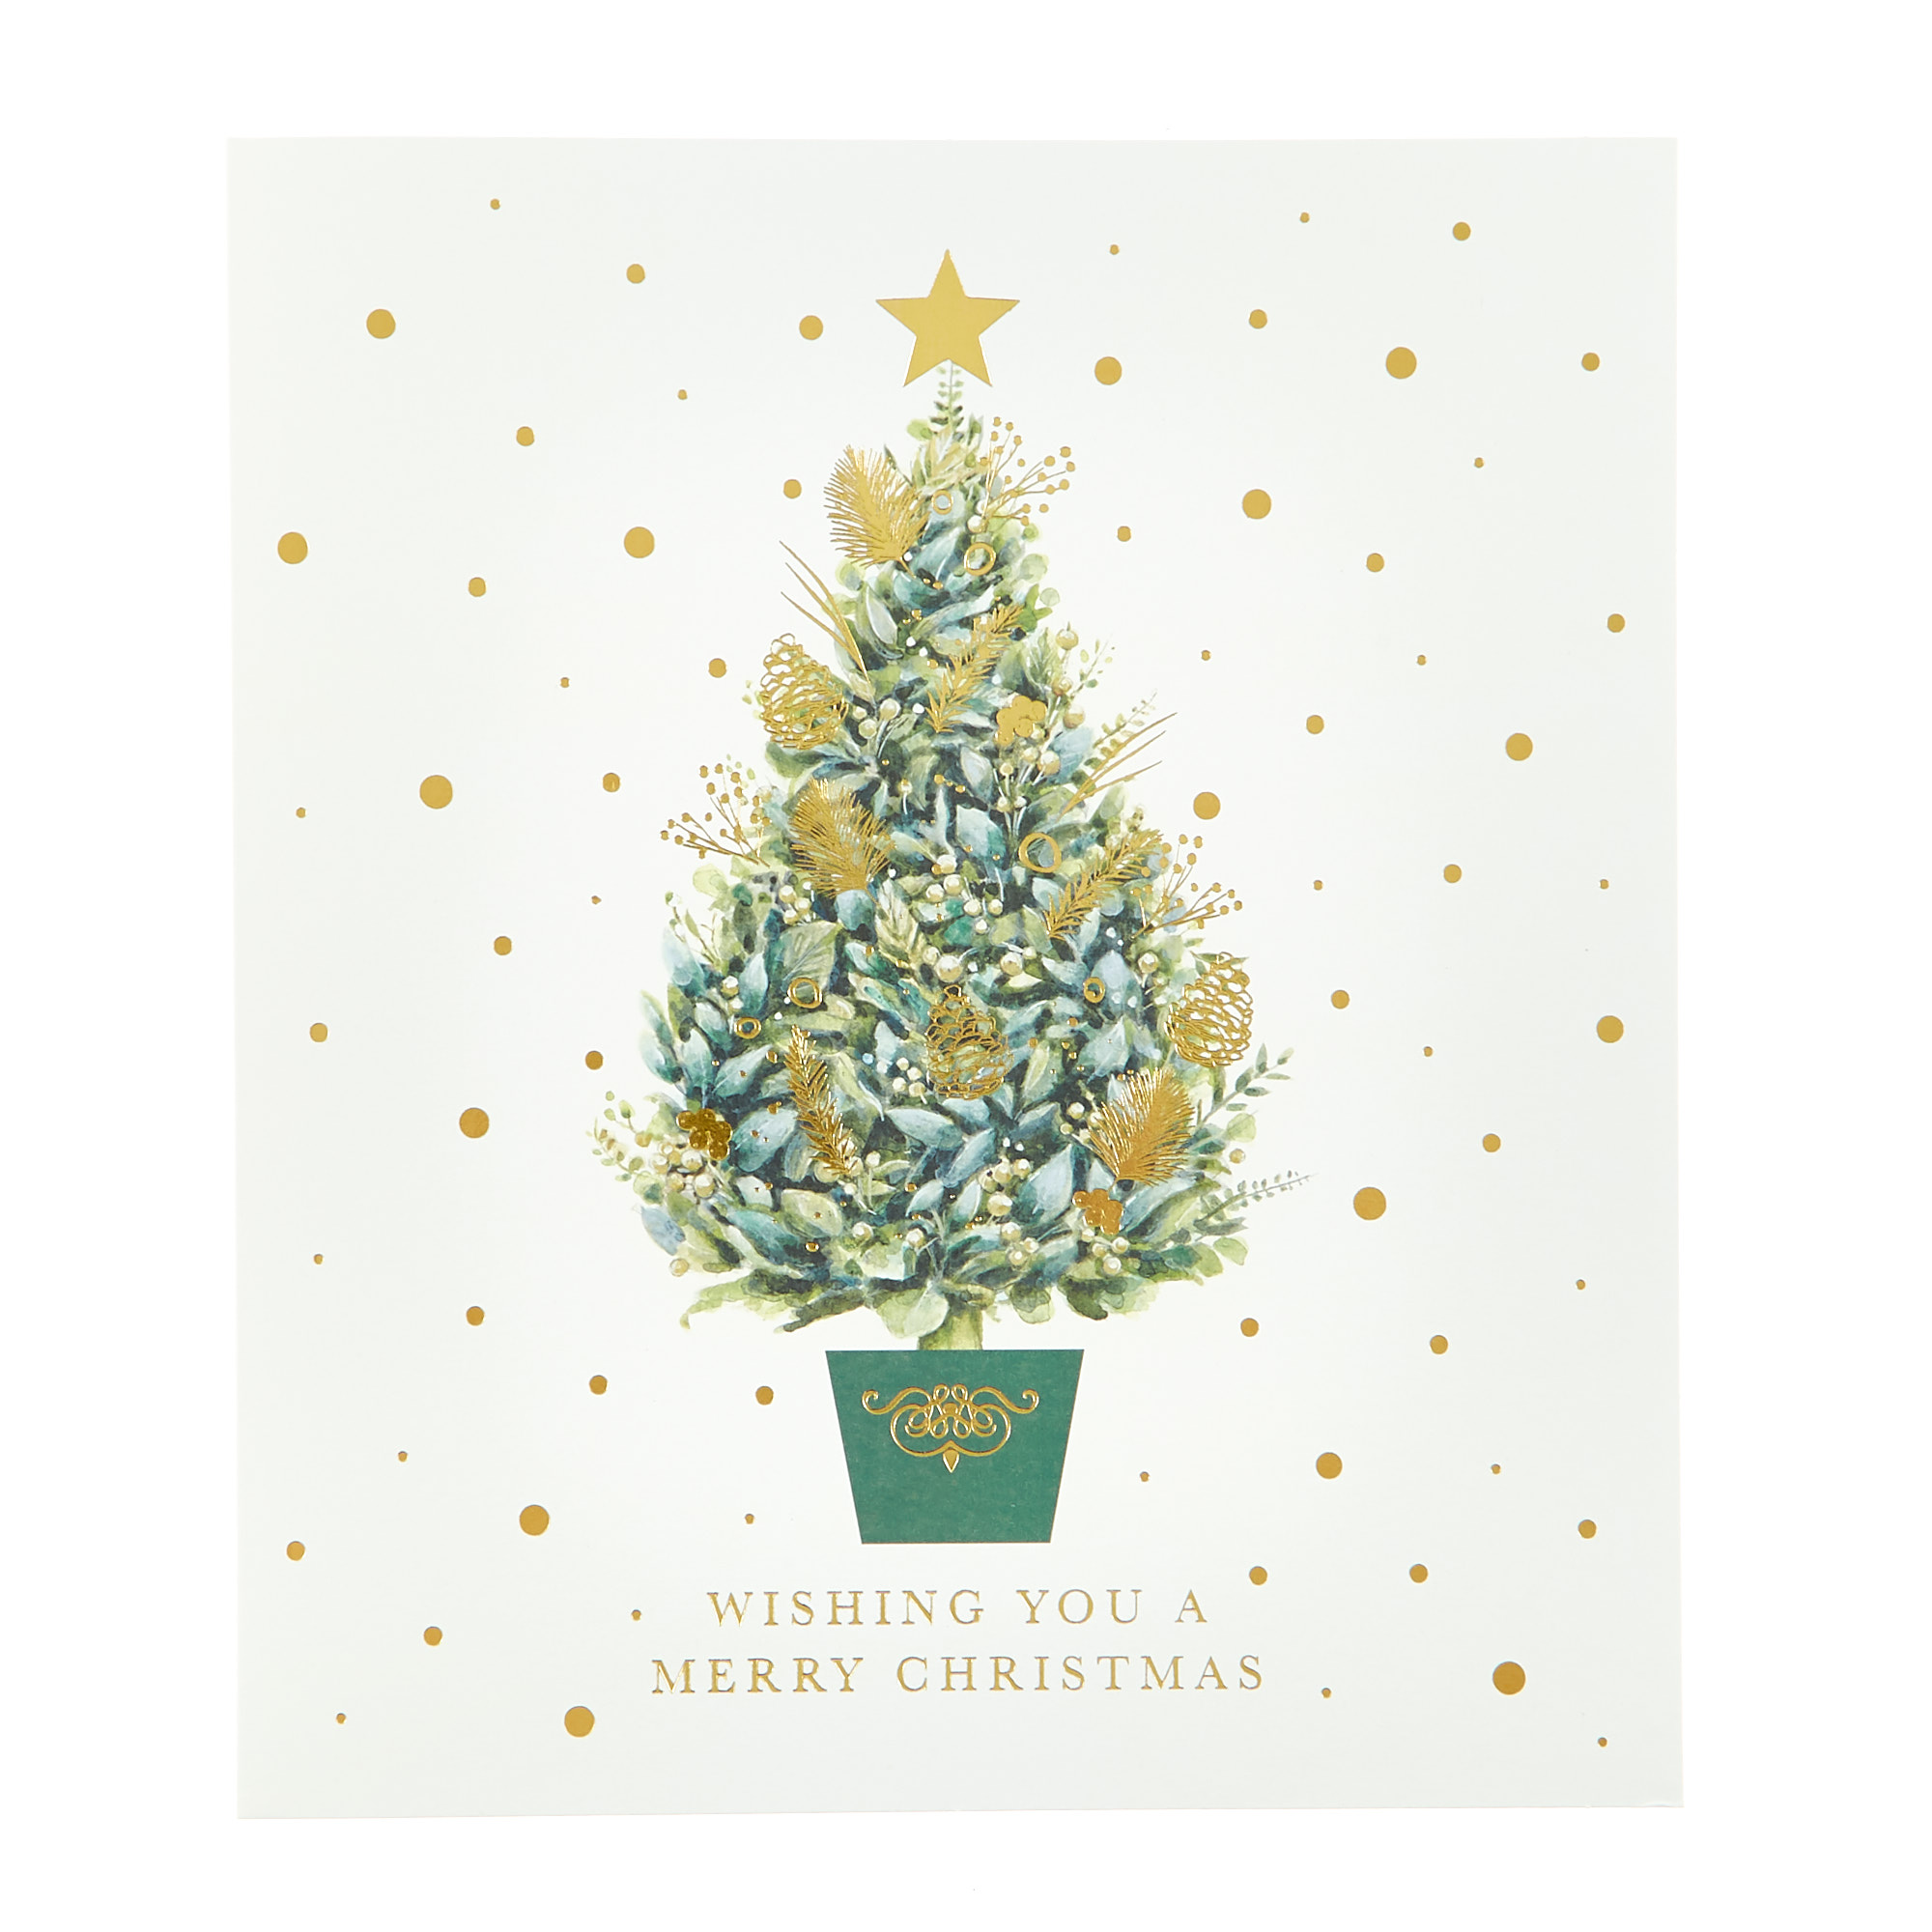 12 Deluxe Charity Boxed Christmas Cards - Tree & Wreath (2 Designs)